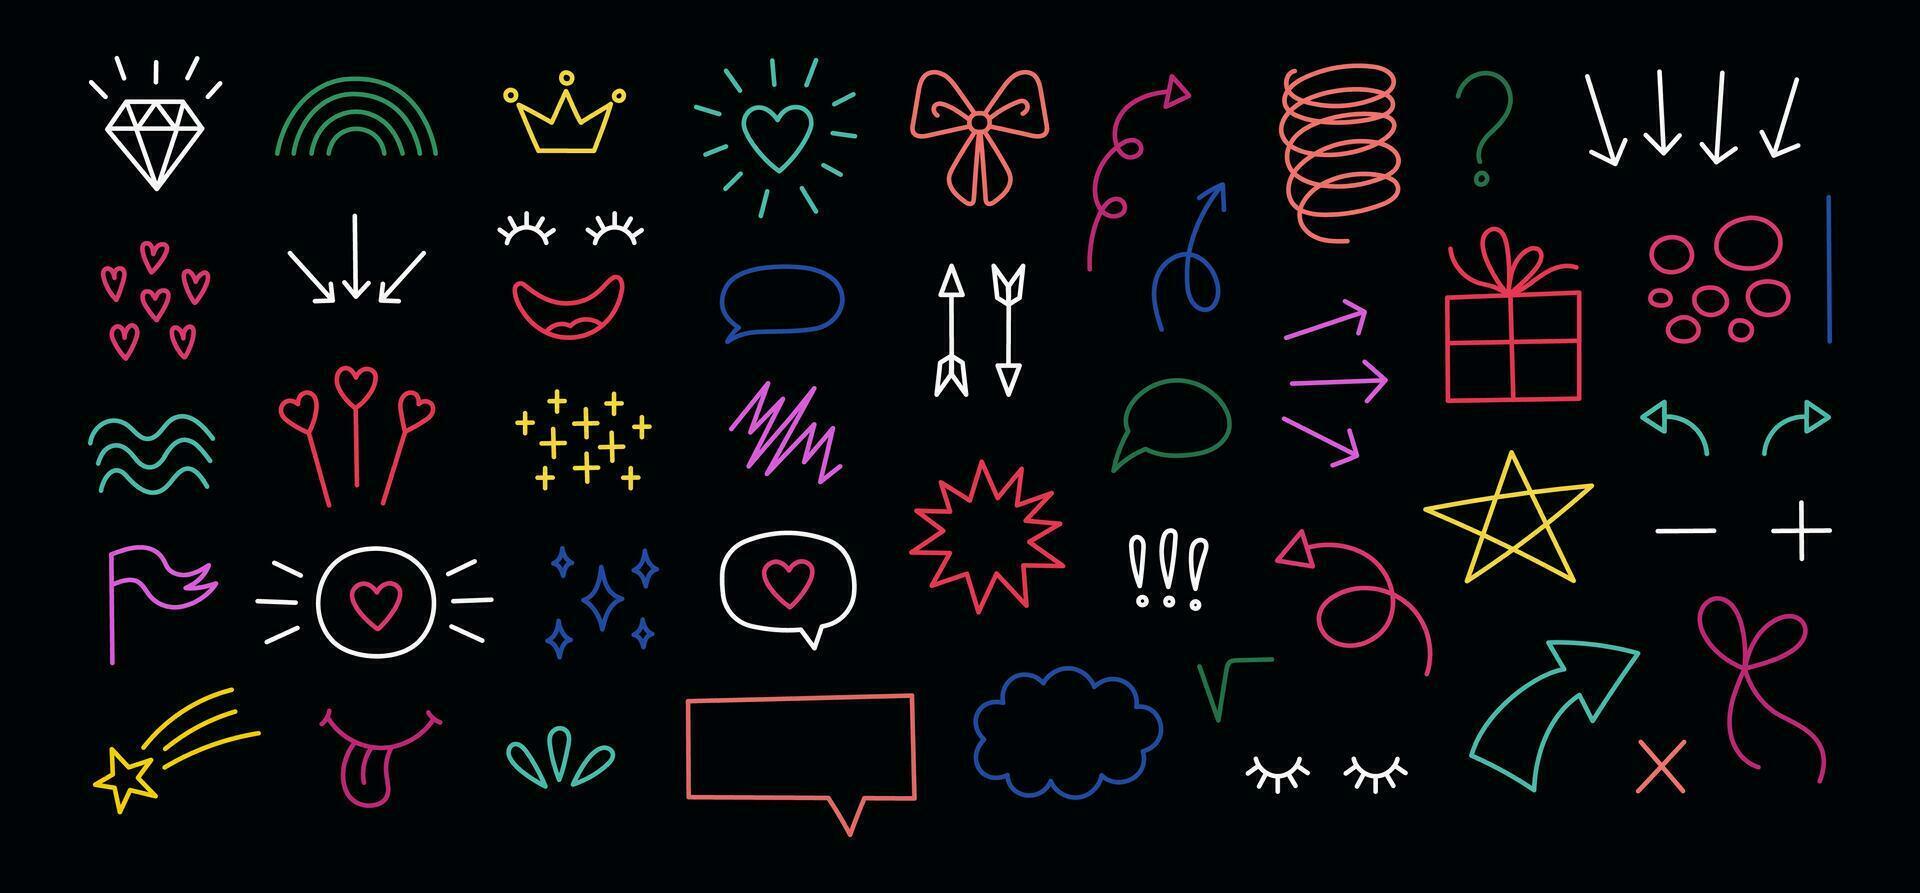 Hand drawn doodle elements set. Dark theme. Cartoon illustrations on black background. Neon elements. Hand drawn Abstract shapes. Doodles of hearts, rainbow, bows, stars, gifts, arrows. vector